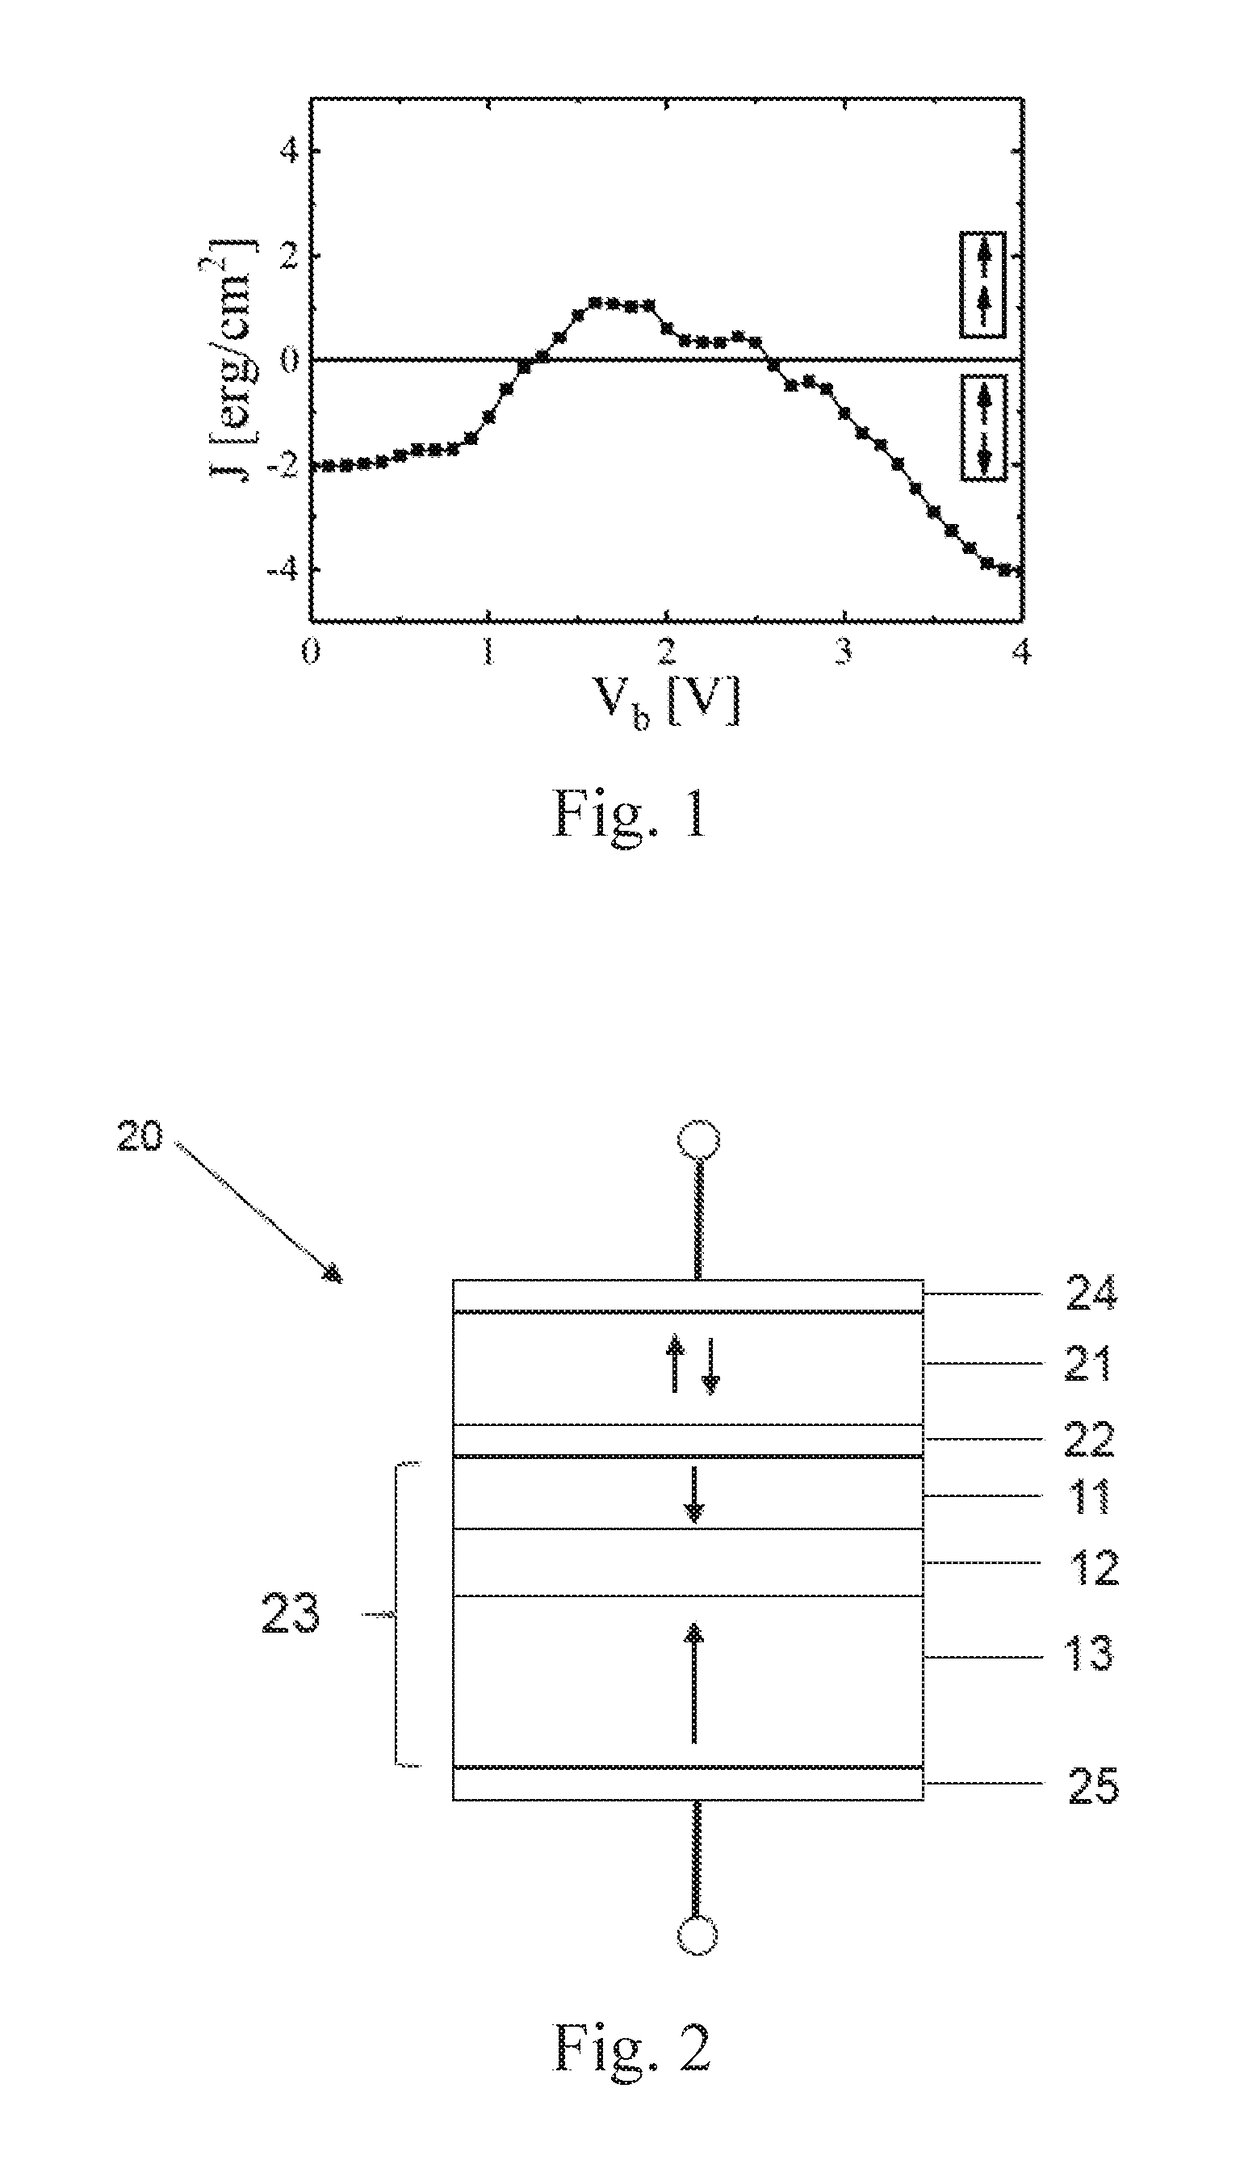 Novel magnetic tunnel junction device and magnetic random access memory